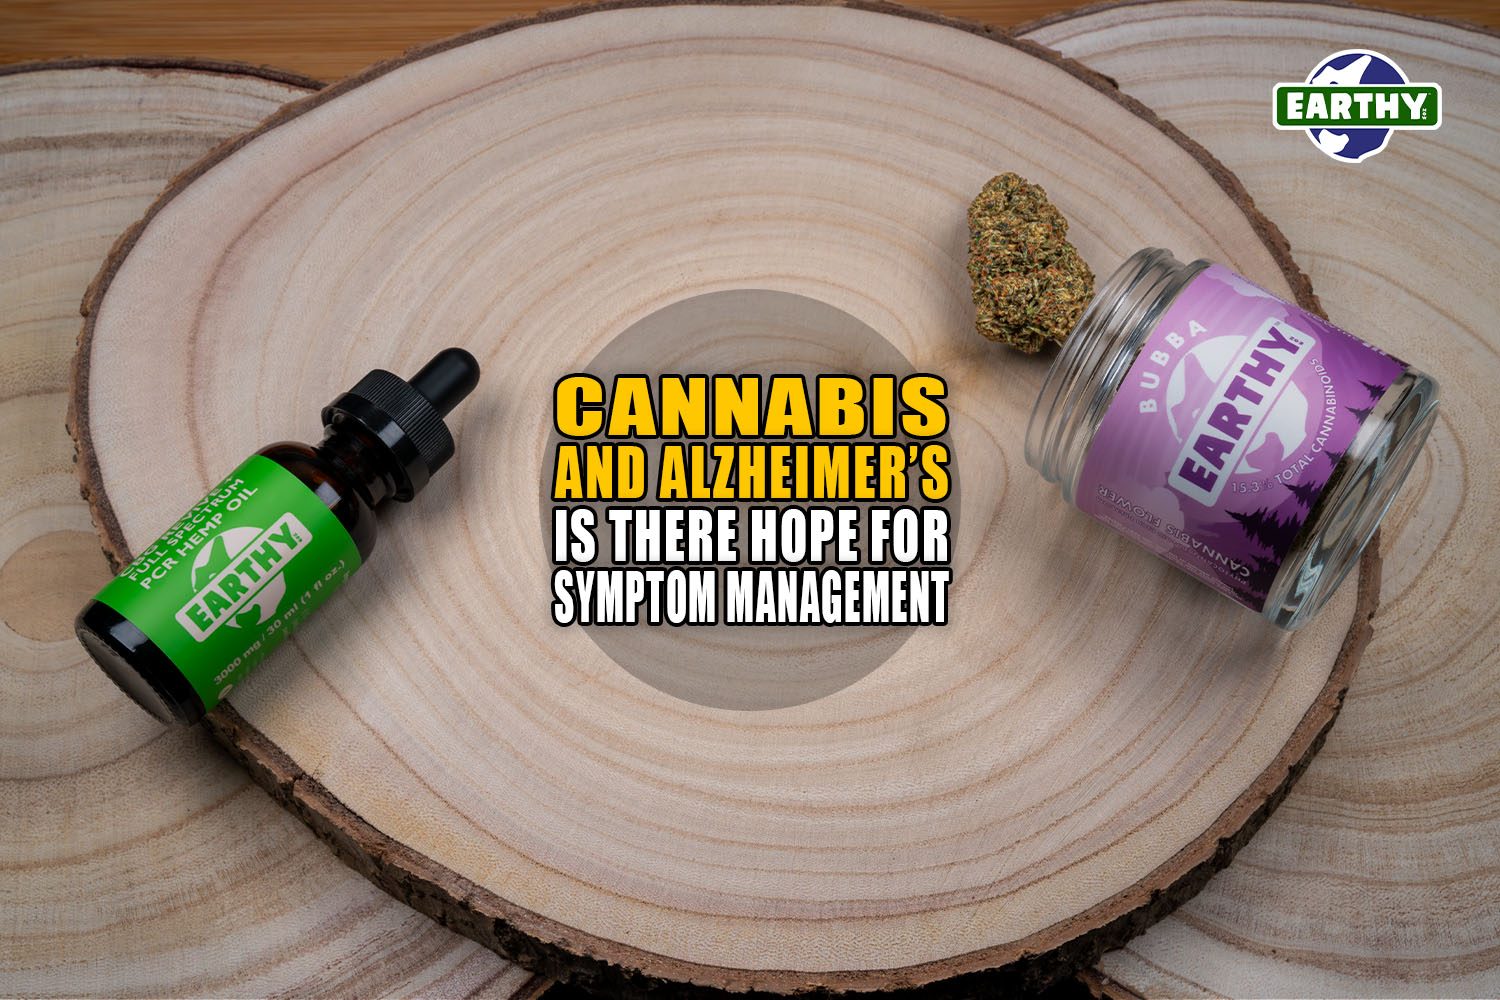 Cannabis and Alzheimer's: Is There Hope for Symptom Management? | Earthy Now